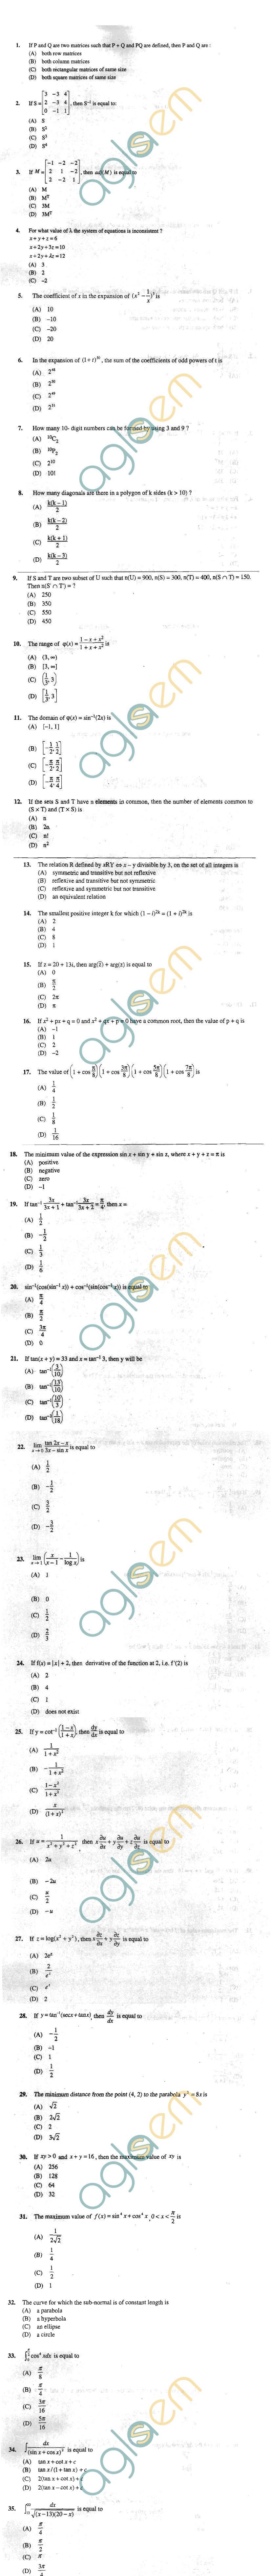 OJEE 2013 Question Paper for MCA